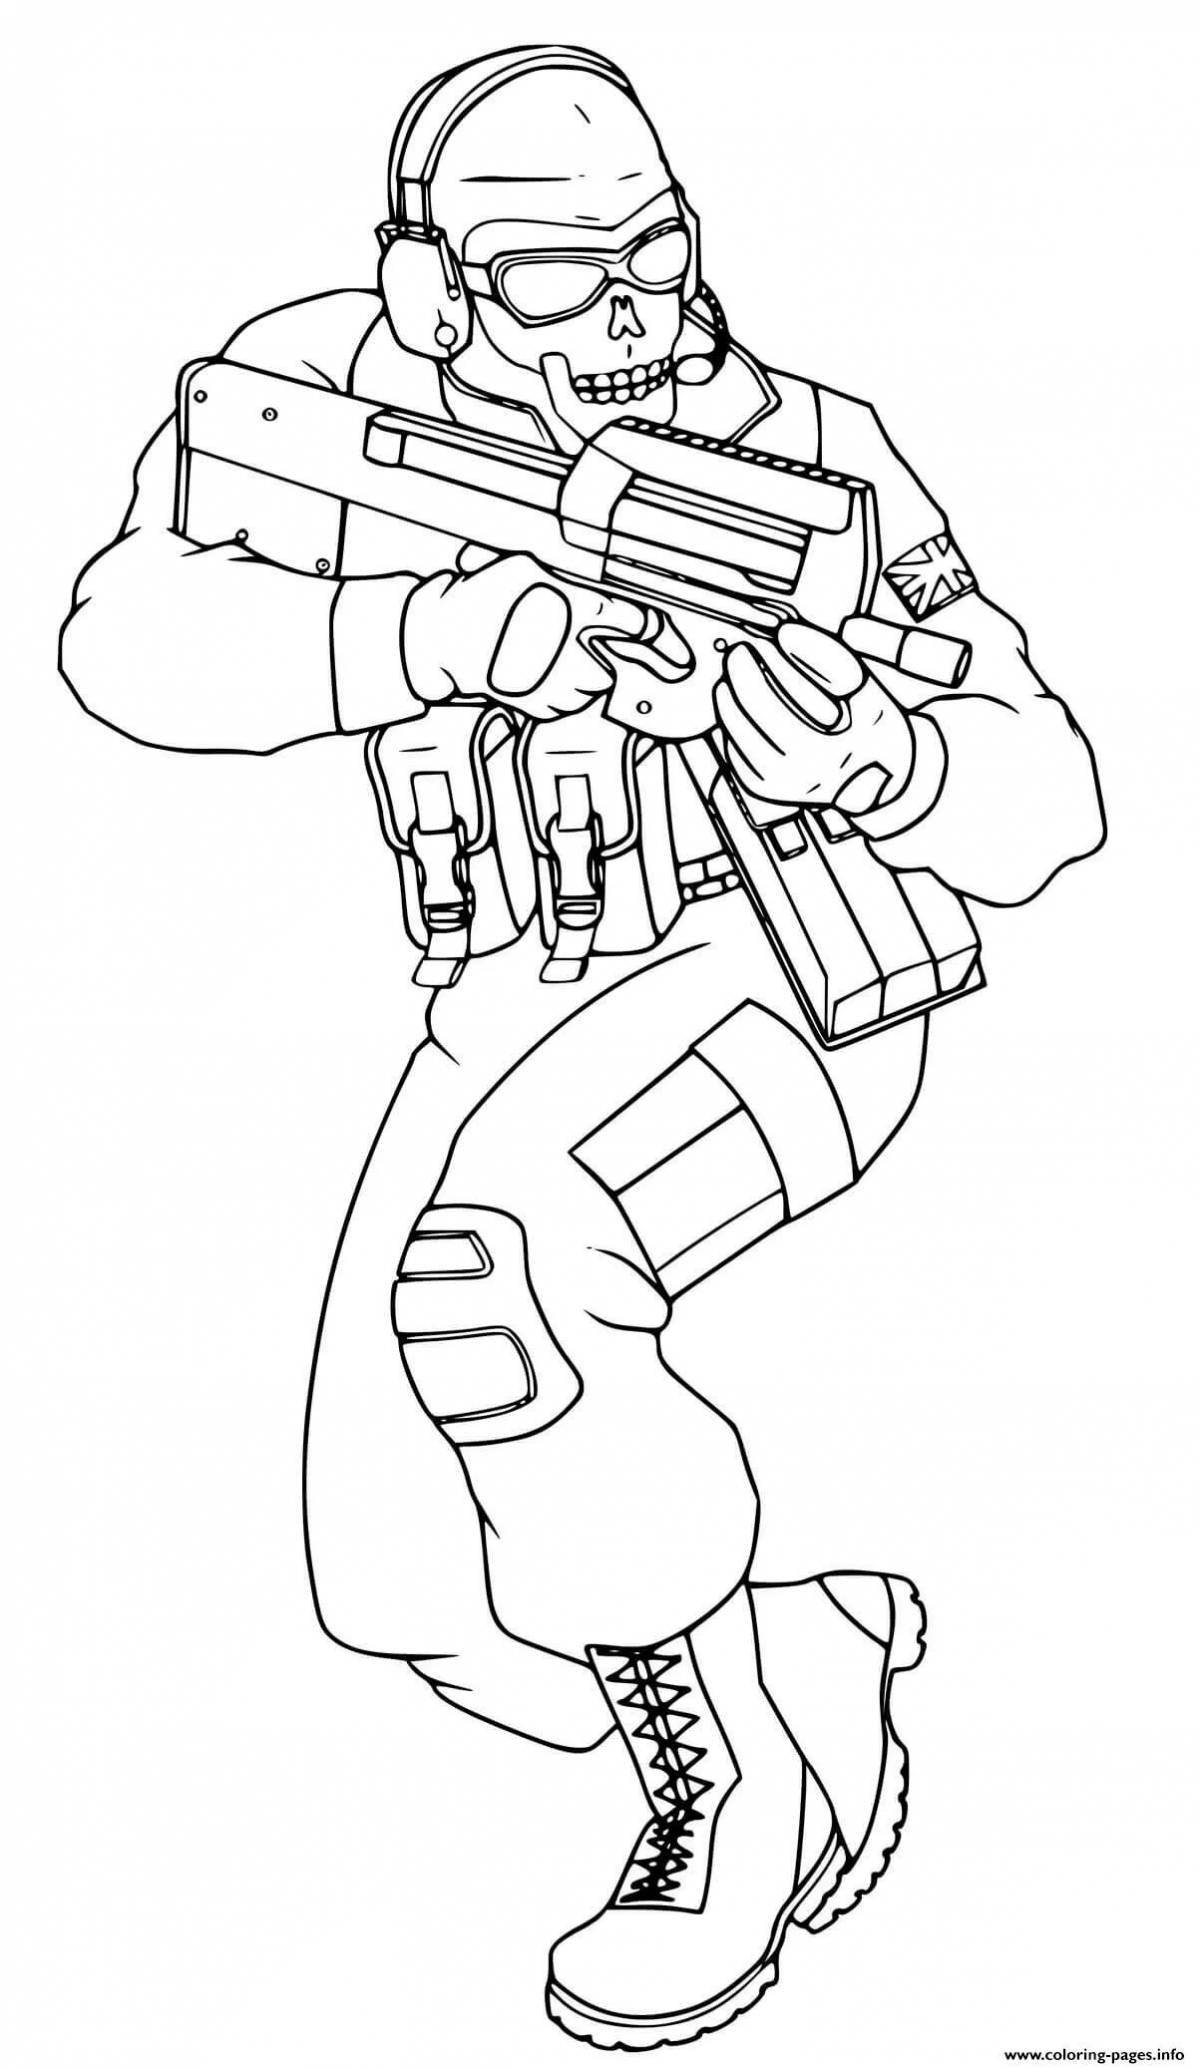 Amazing call of duty coloring page